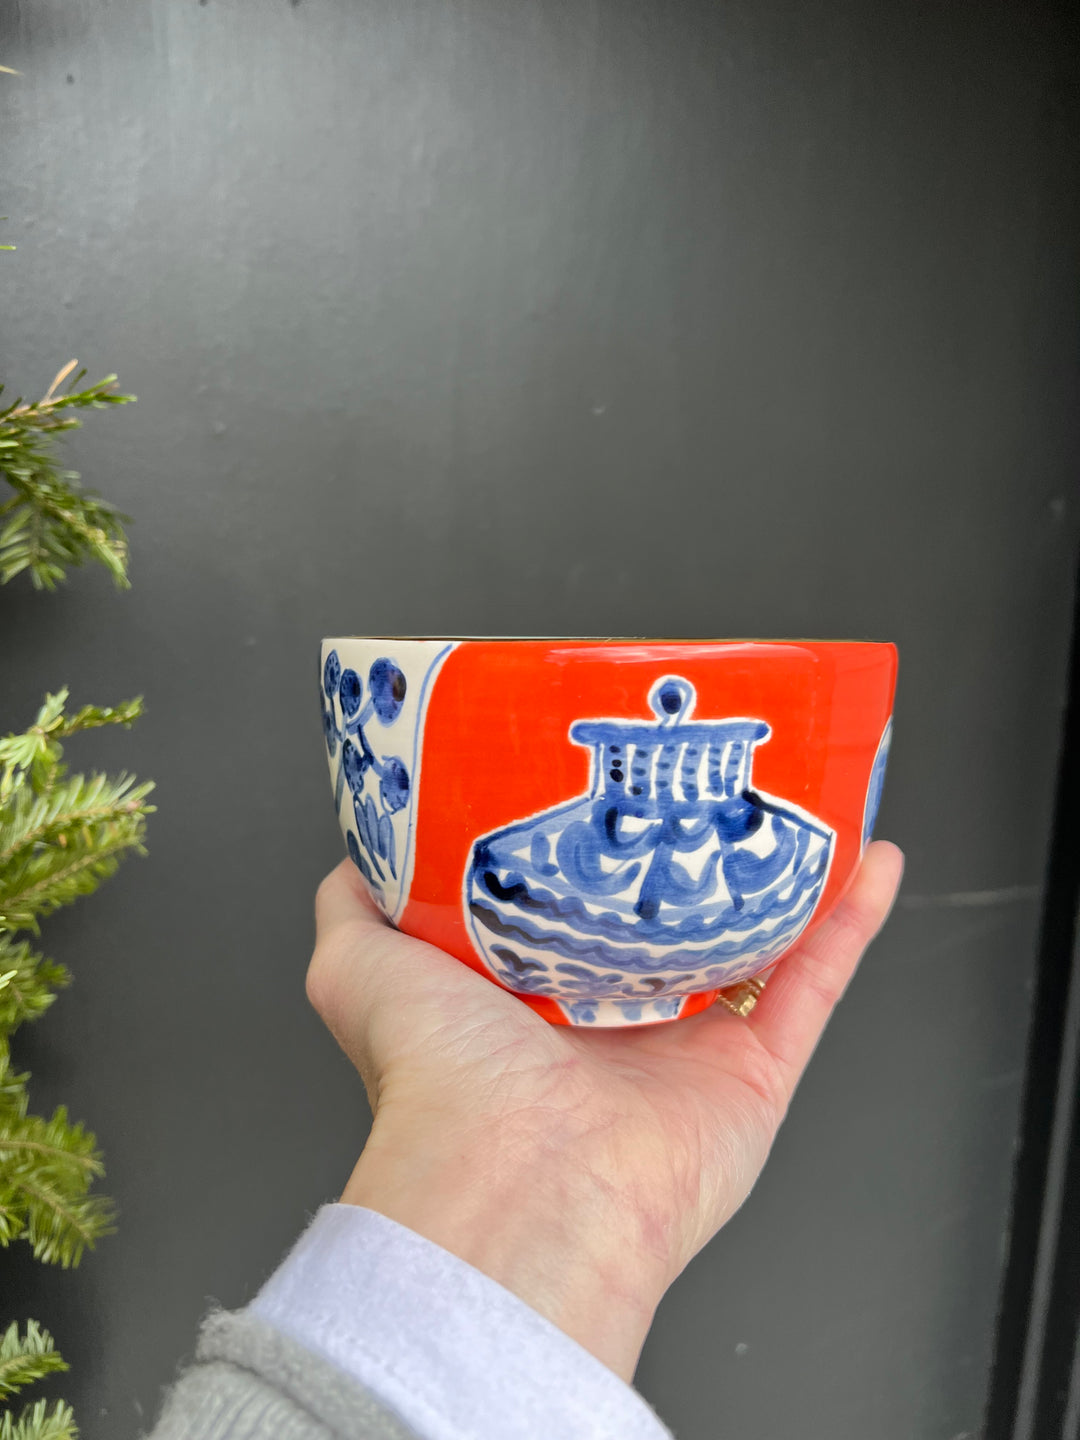 A dark red/orange hand painted bowl with white and blue painted china patterns on it and a gold rim.